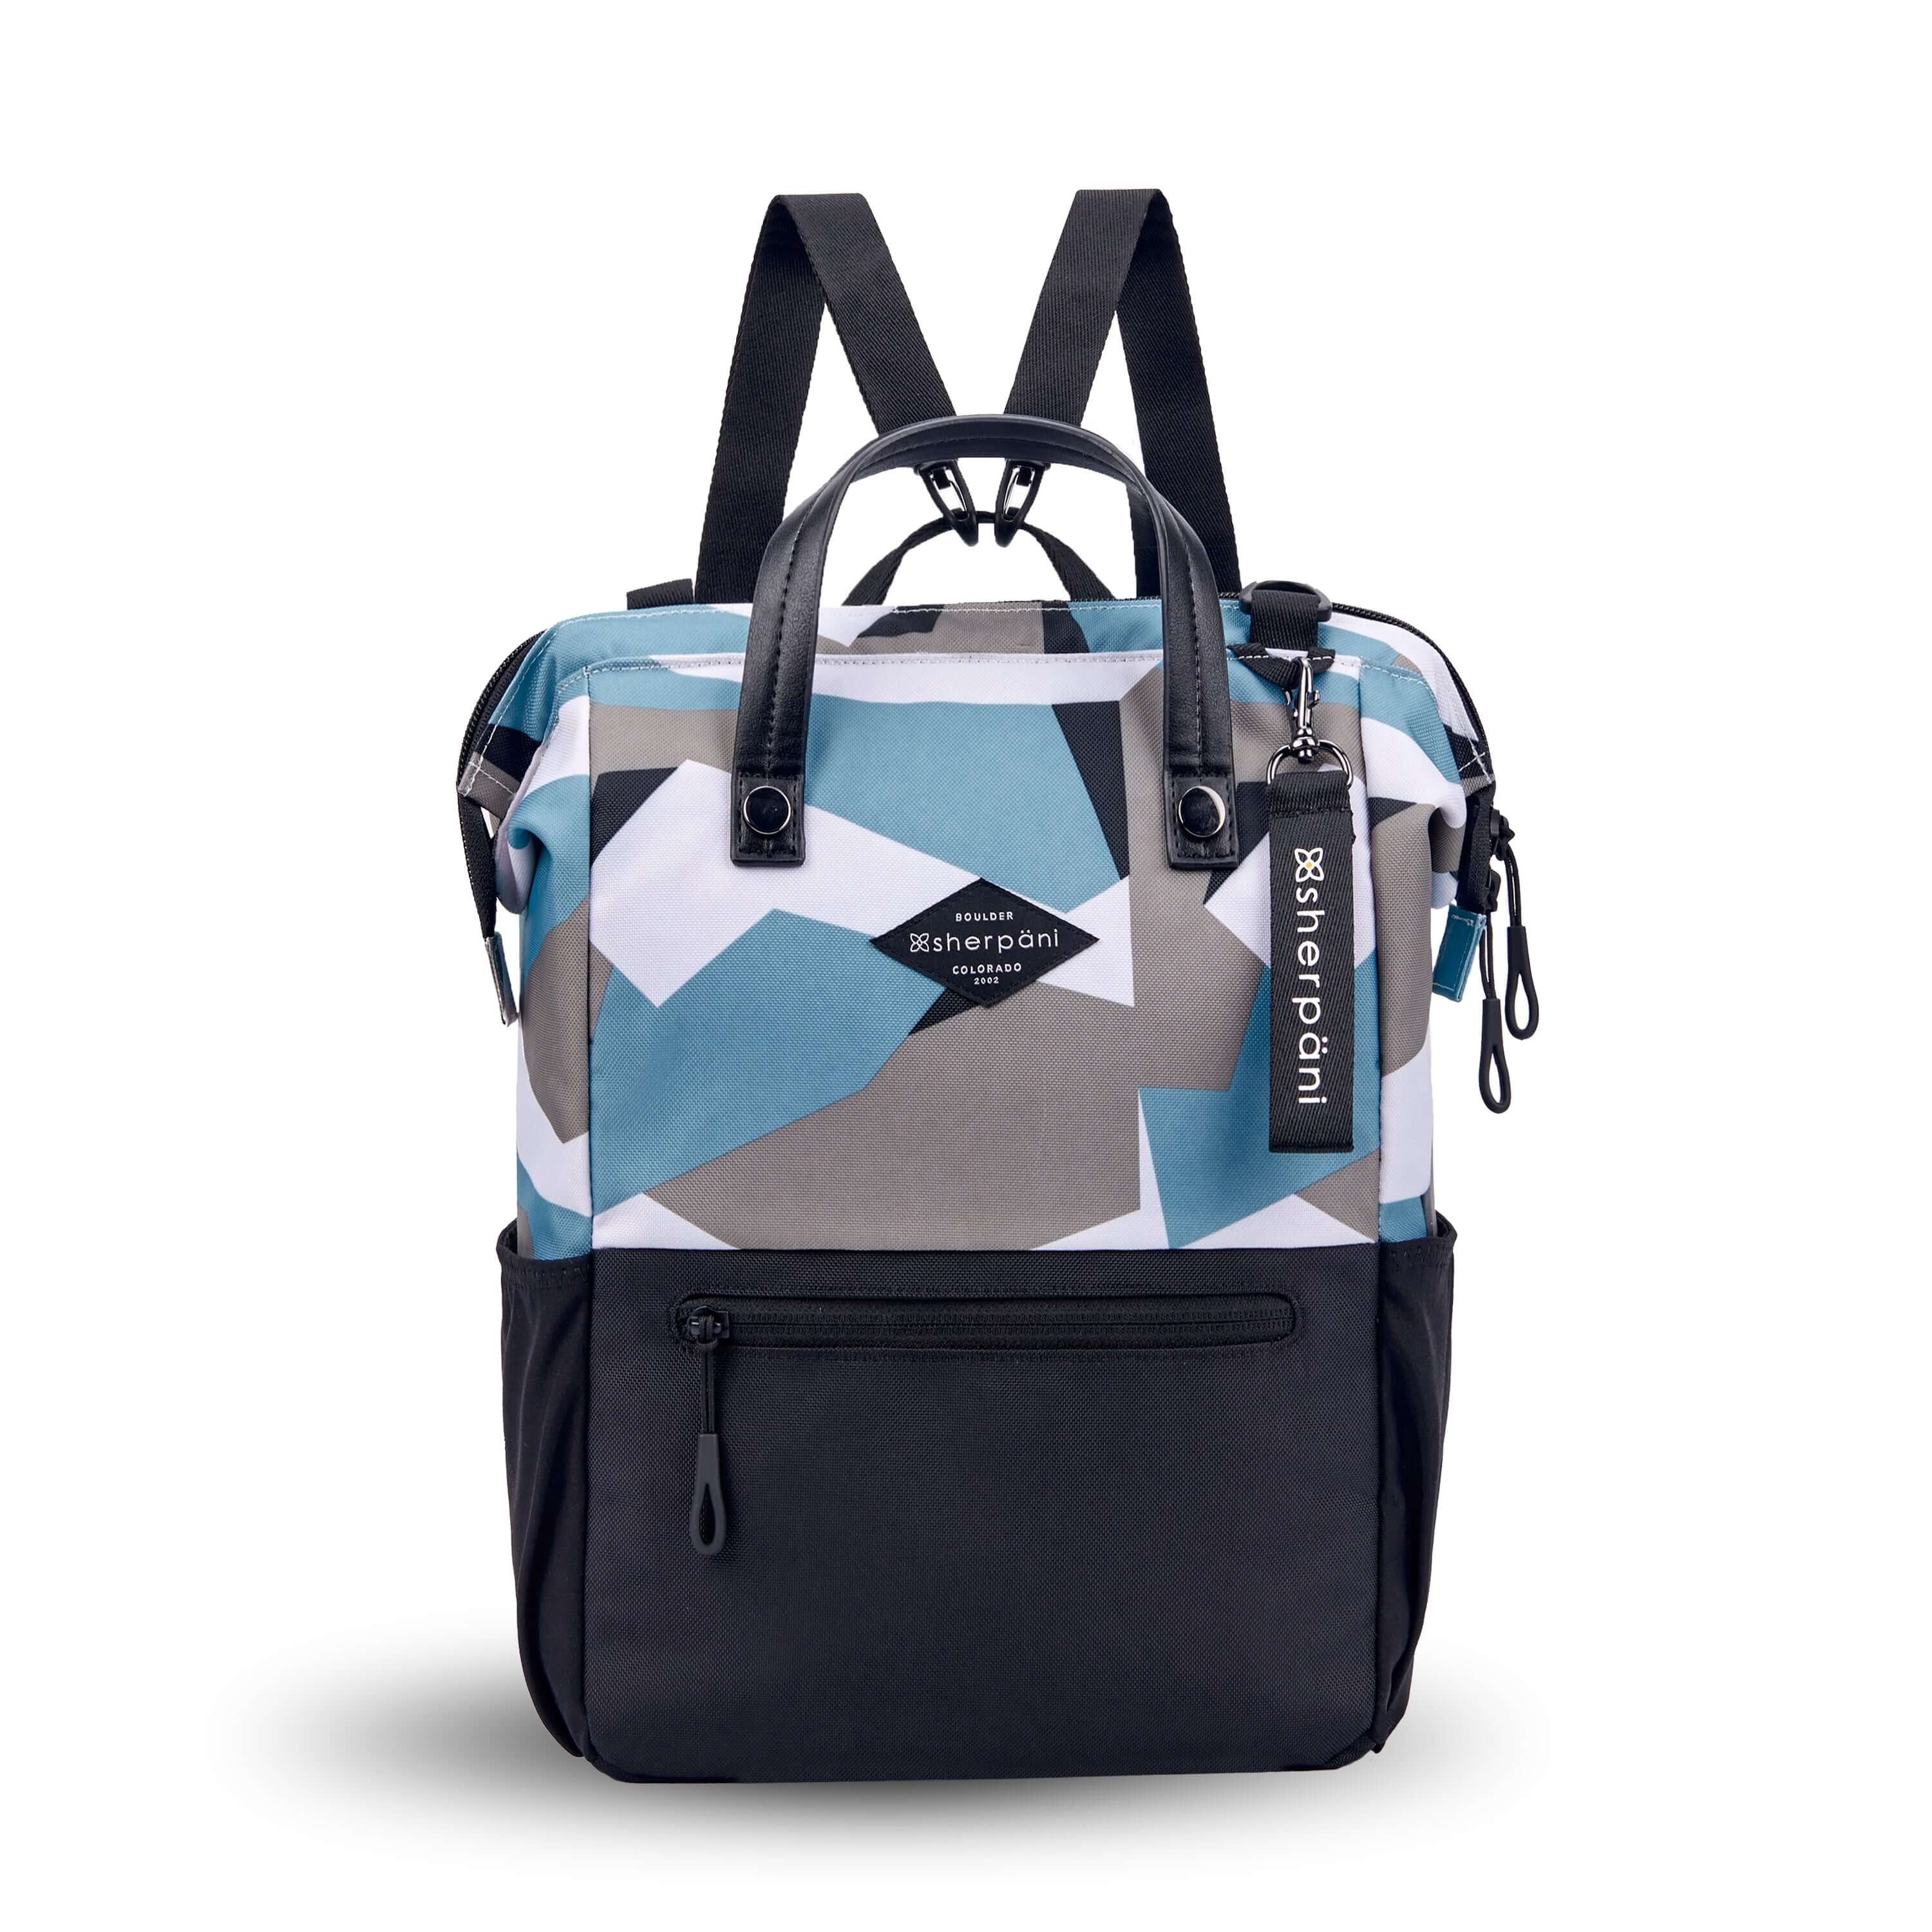 Flat front view of Sherpani three in one bag, the Dispatch in Summer Camo. The bag is two toned: the top is a camouflage pattern of light blue, gray and white, the bottom is black. There is an external zipper pocket on the front panel. Easy pull zippers are accented in black. A branded Sherpani keychain is clipped to the upper right corner. Water bottle holders sit on either side of the bag. It has short tote handles and adjustable straps that can function for a backpack or crossbody. 